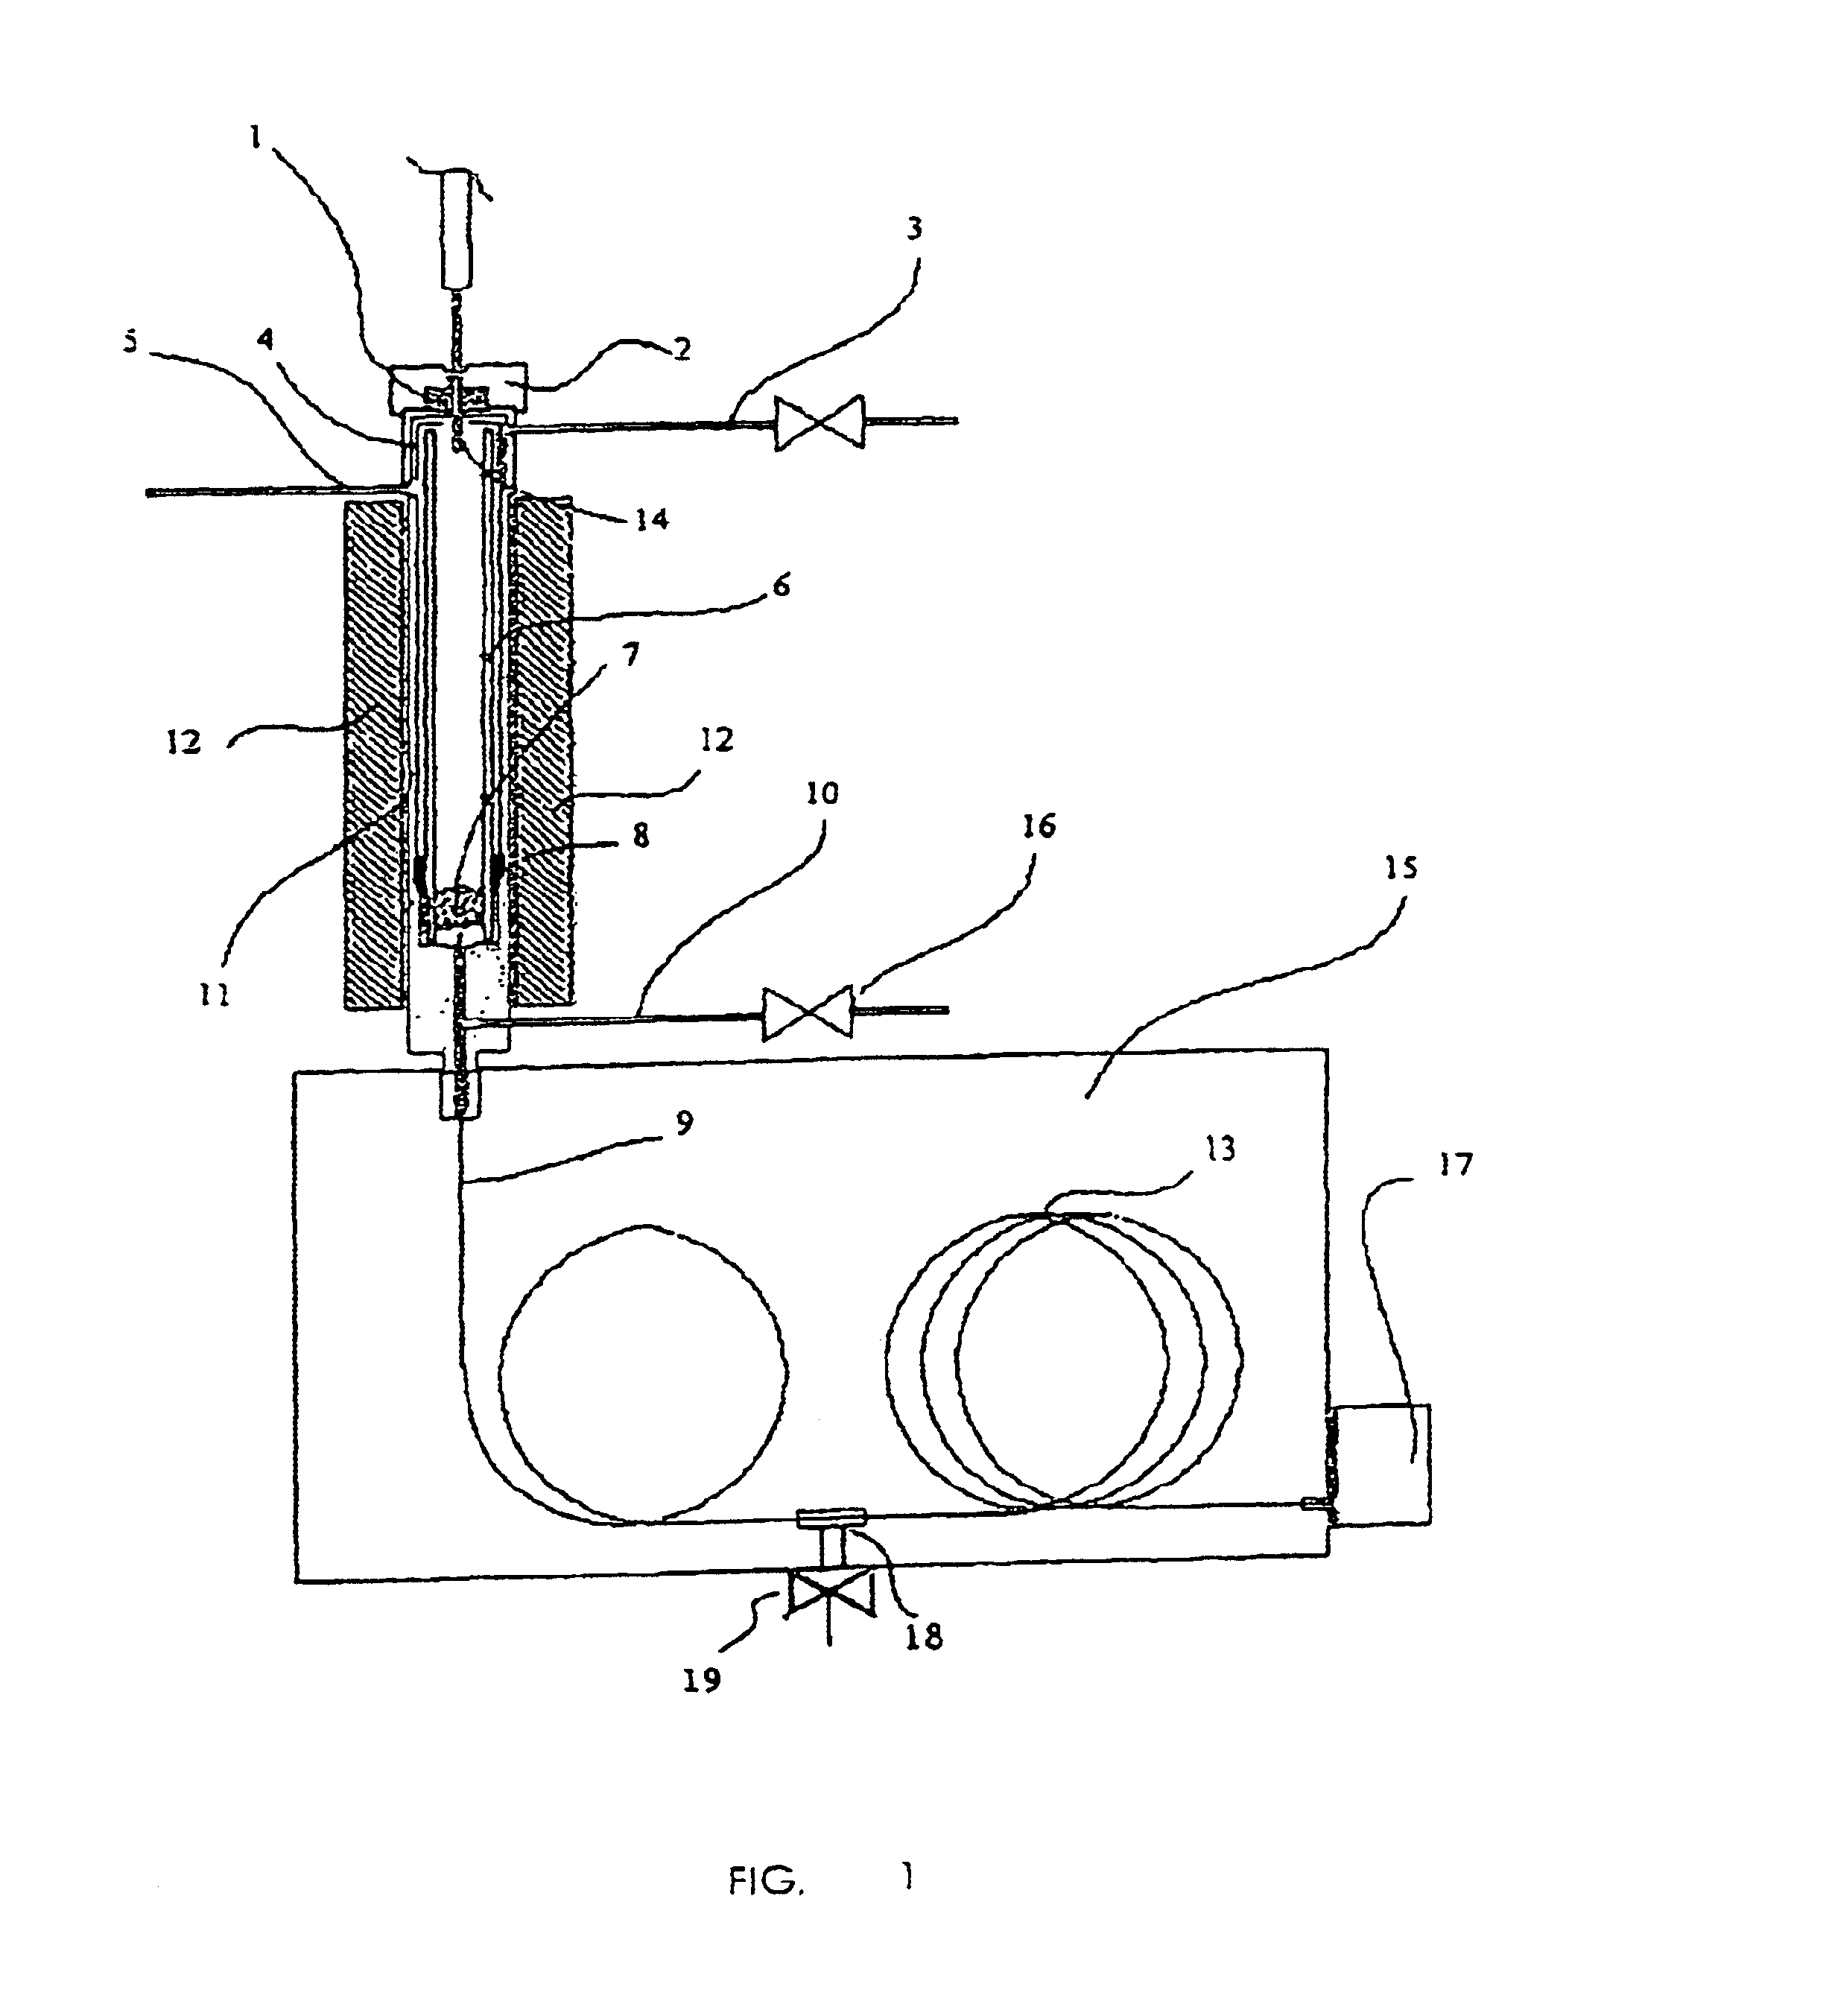 Method and device for vaporization injection of high volumes in gas chromatographic analysis